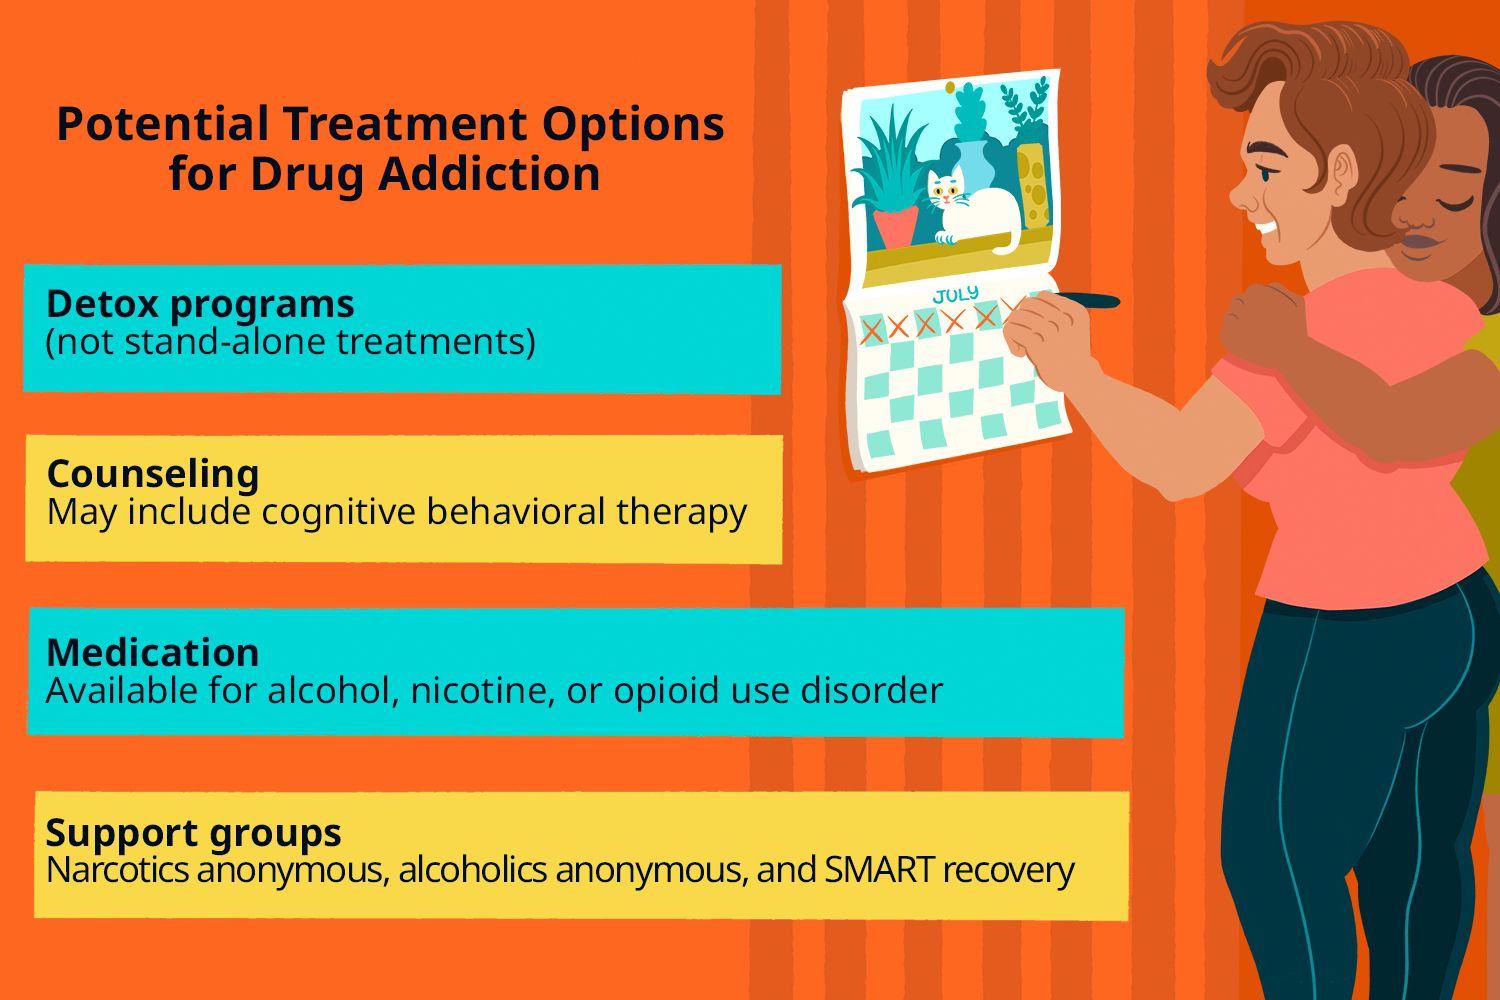 An illustration with potential treatment options for drug addiction